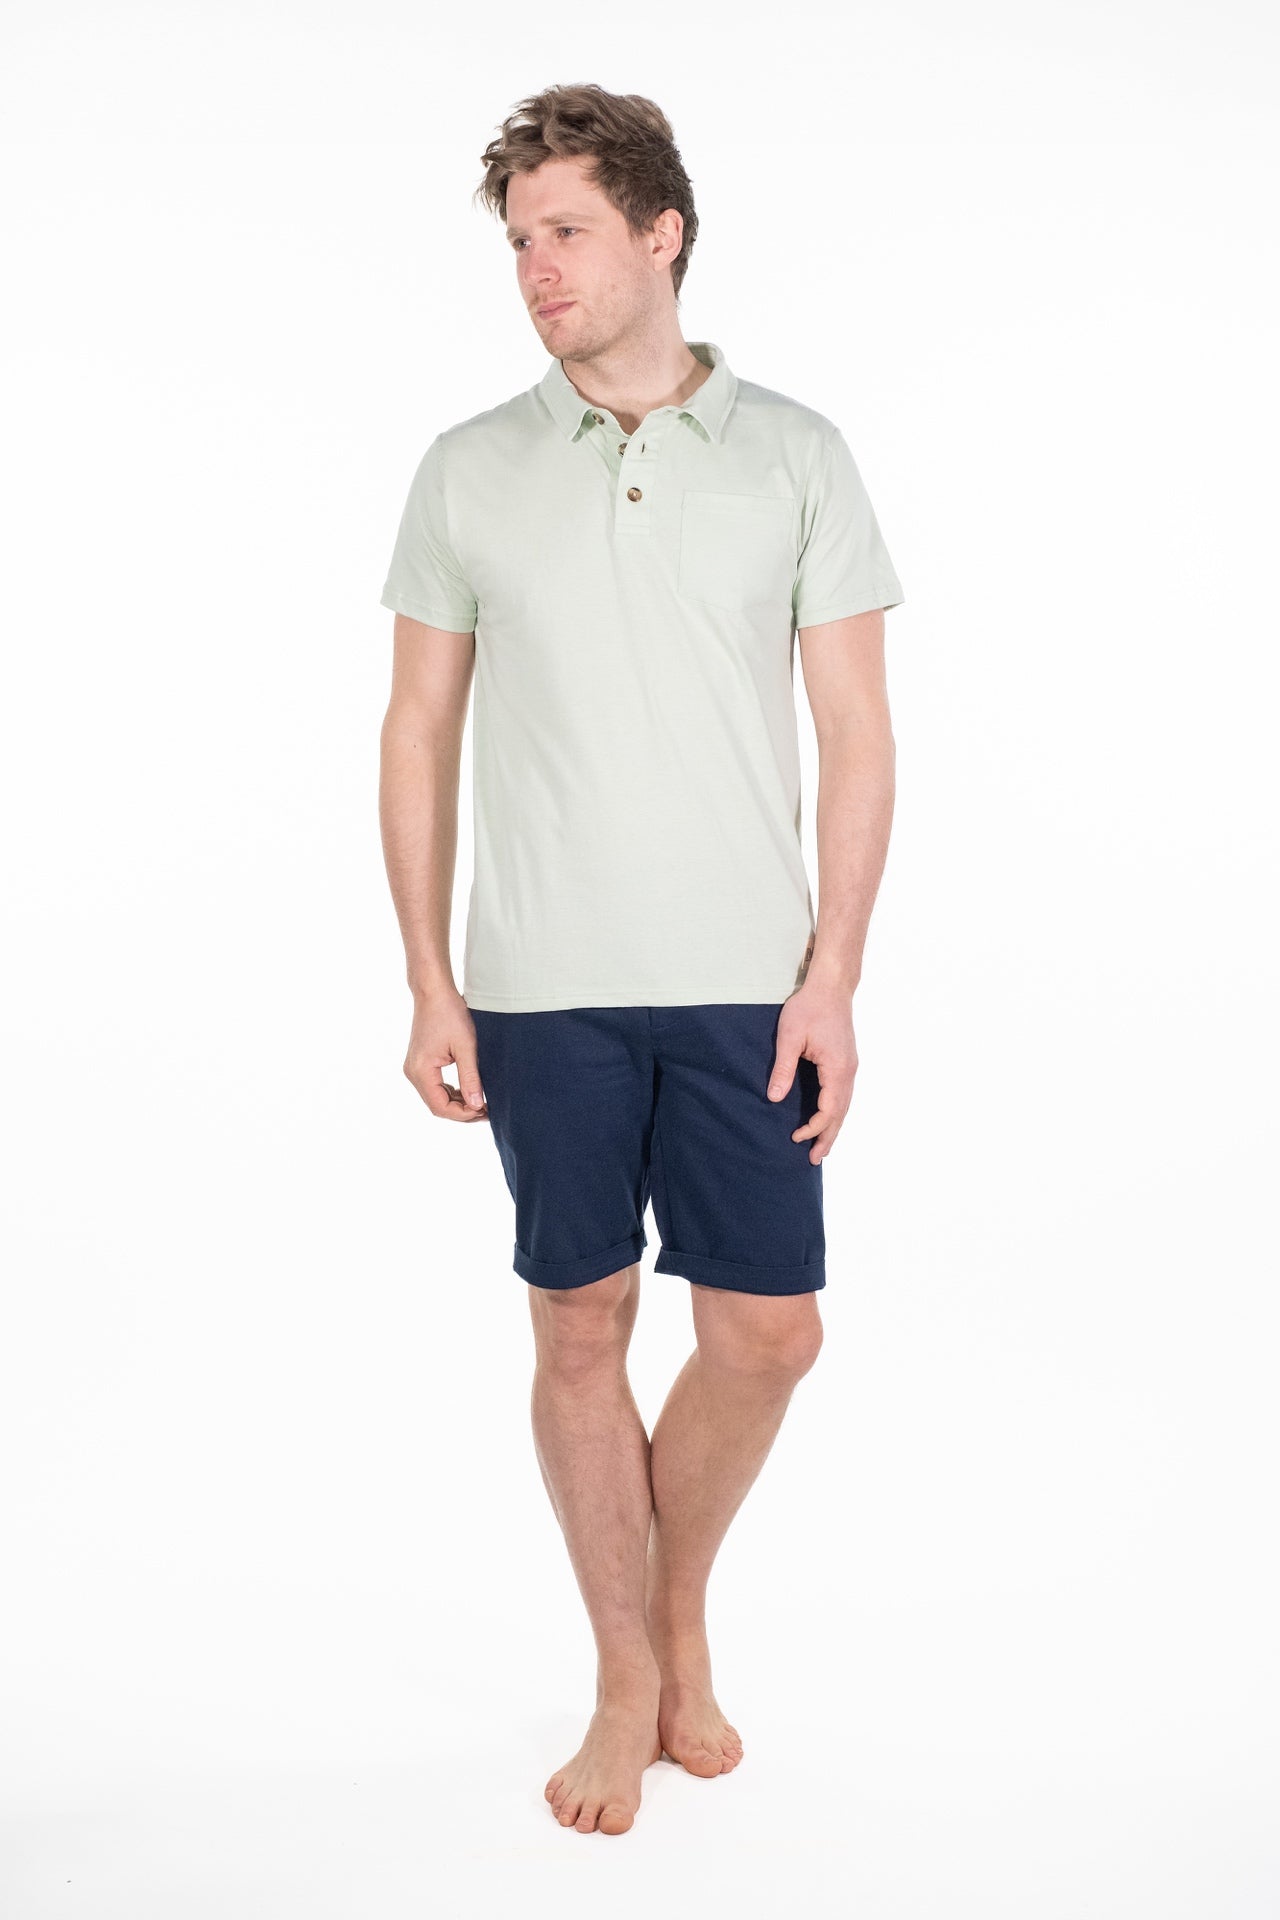 Theo Green Jersey Polo - Rupert and Buckley - Polo Shirt